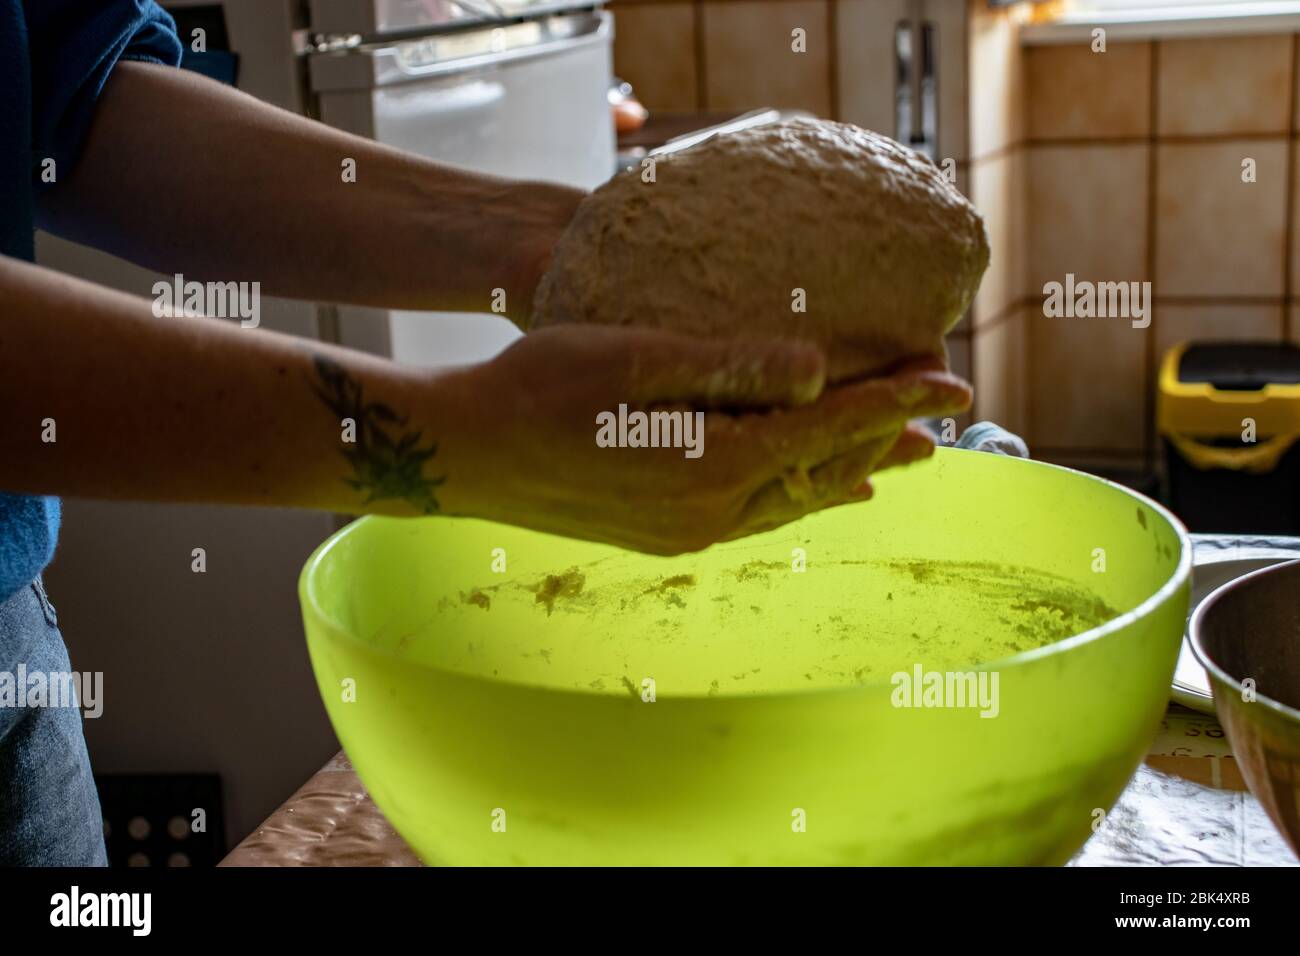 Rome, knead the pizza at home, a soft and slow rising dough. Stock Photo